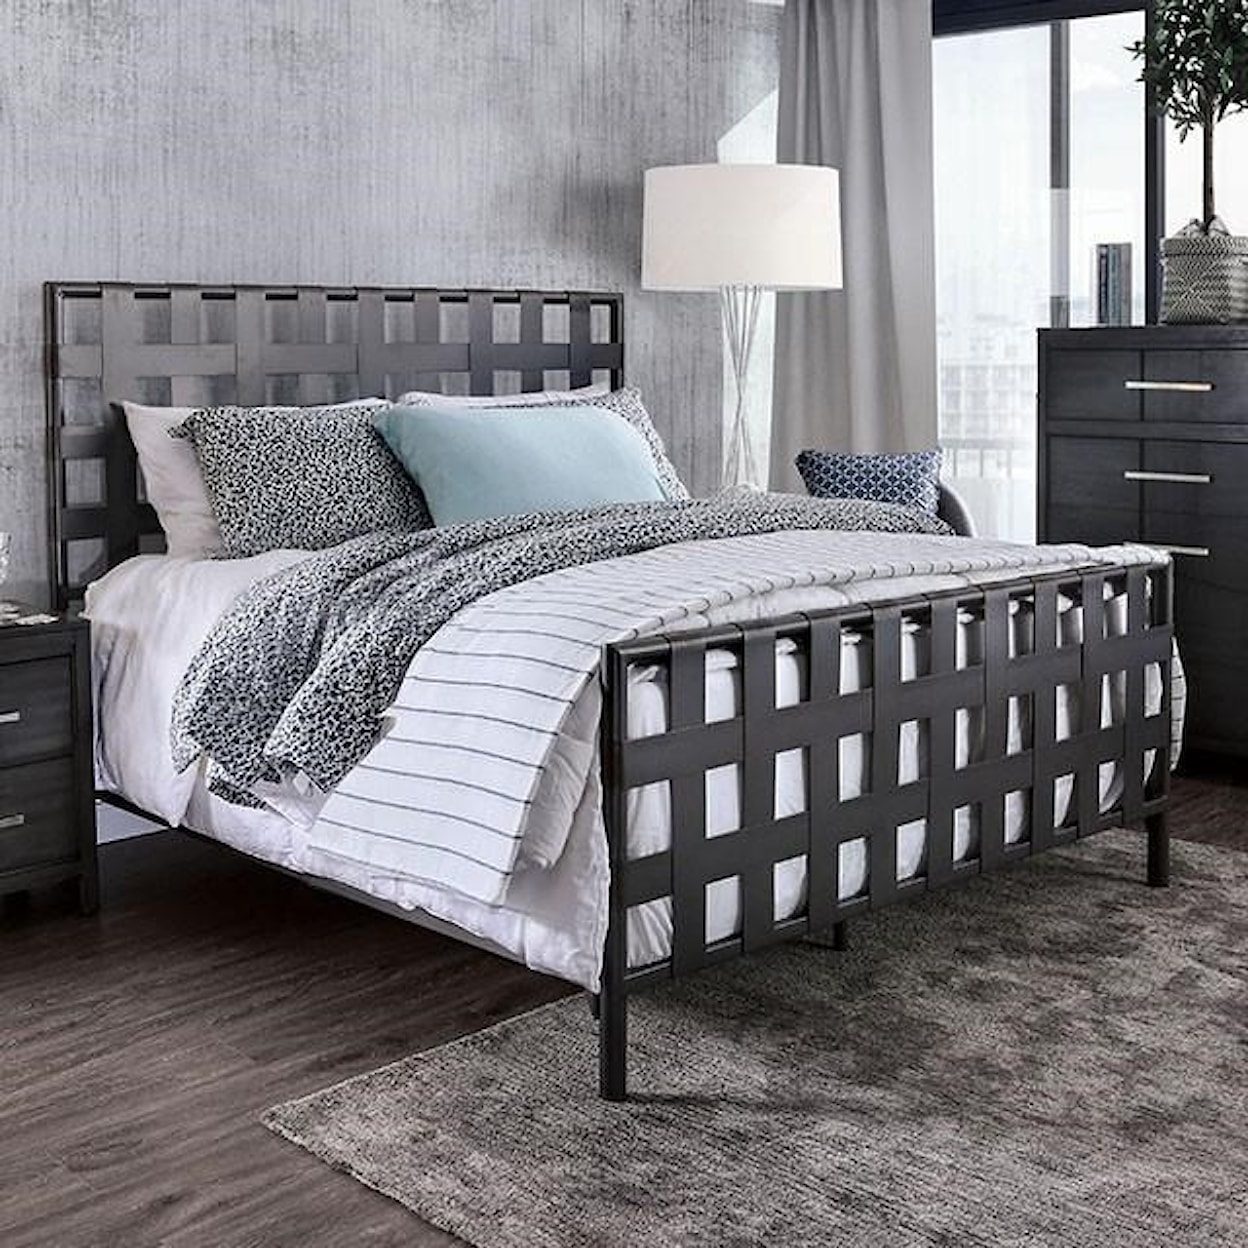 Furniture of America Earlgate King Poster Bed